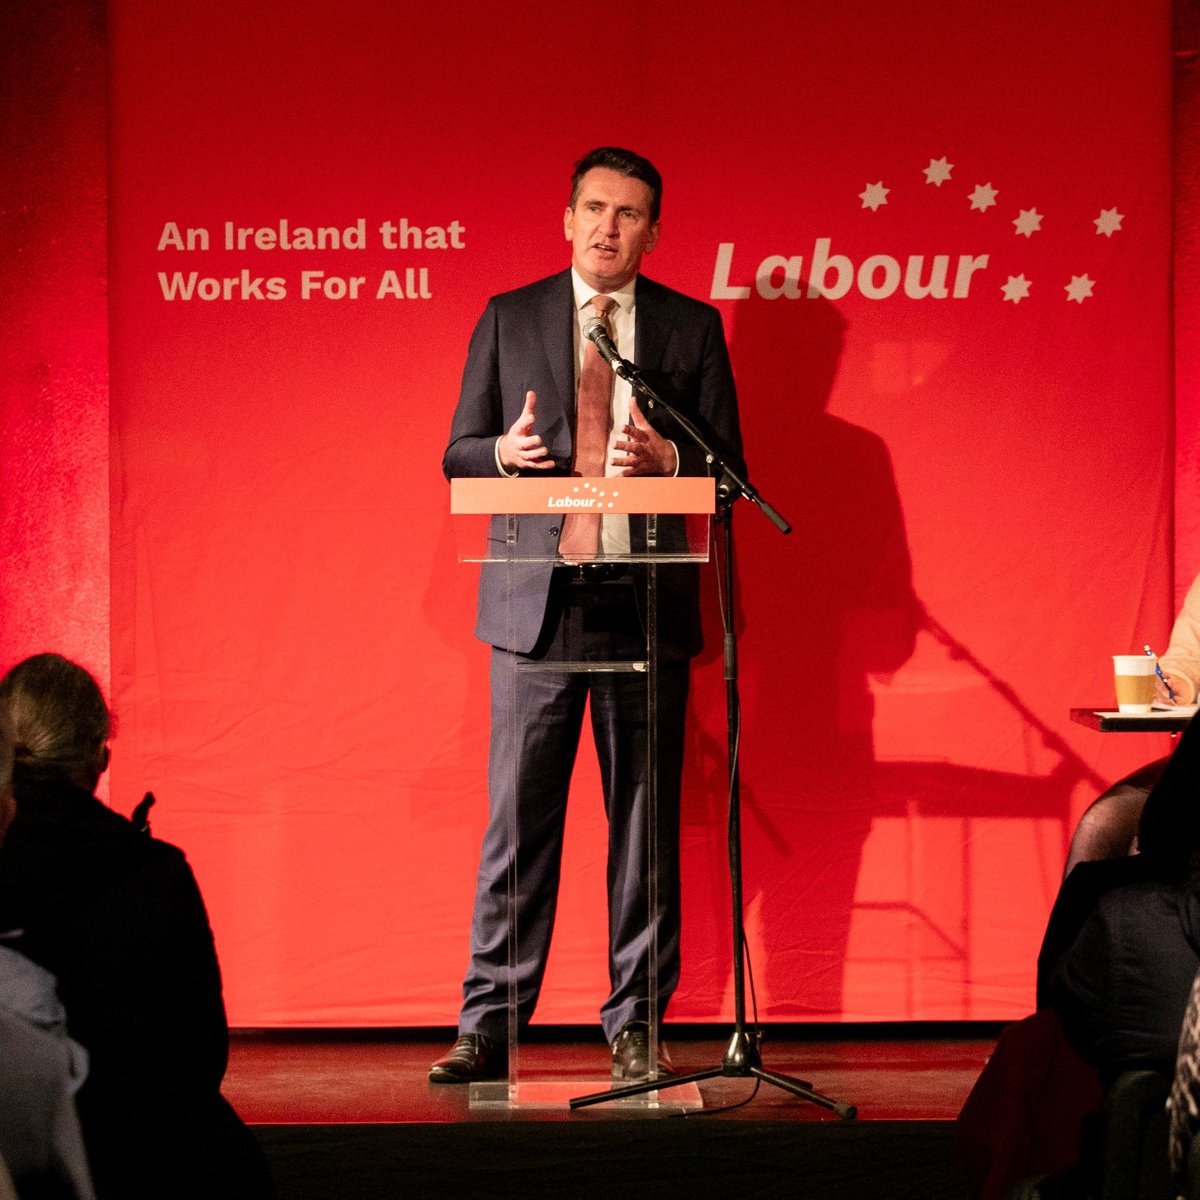 Change in prison culture needed. 'It's time for Fine Gael to wake up and heed the overwhelming evidence that prison should be a last resort, with greater emphasis on rehabilitation and reducing re-offending rates.' @AodhanORiordain Read more: labour.ie/news/2024/04/2…